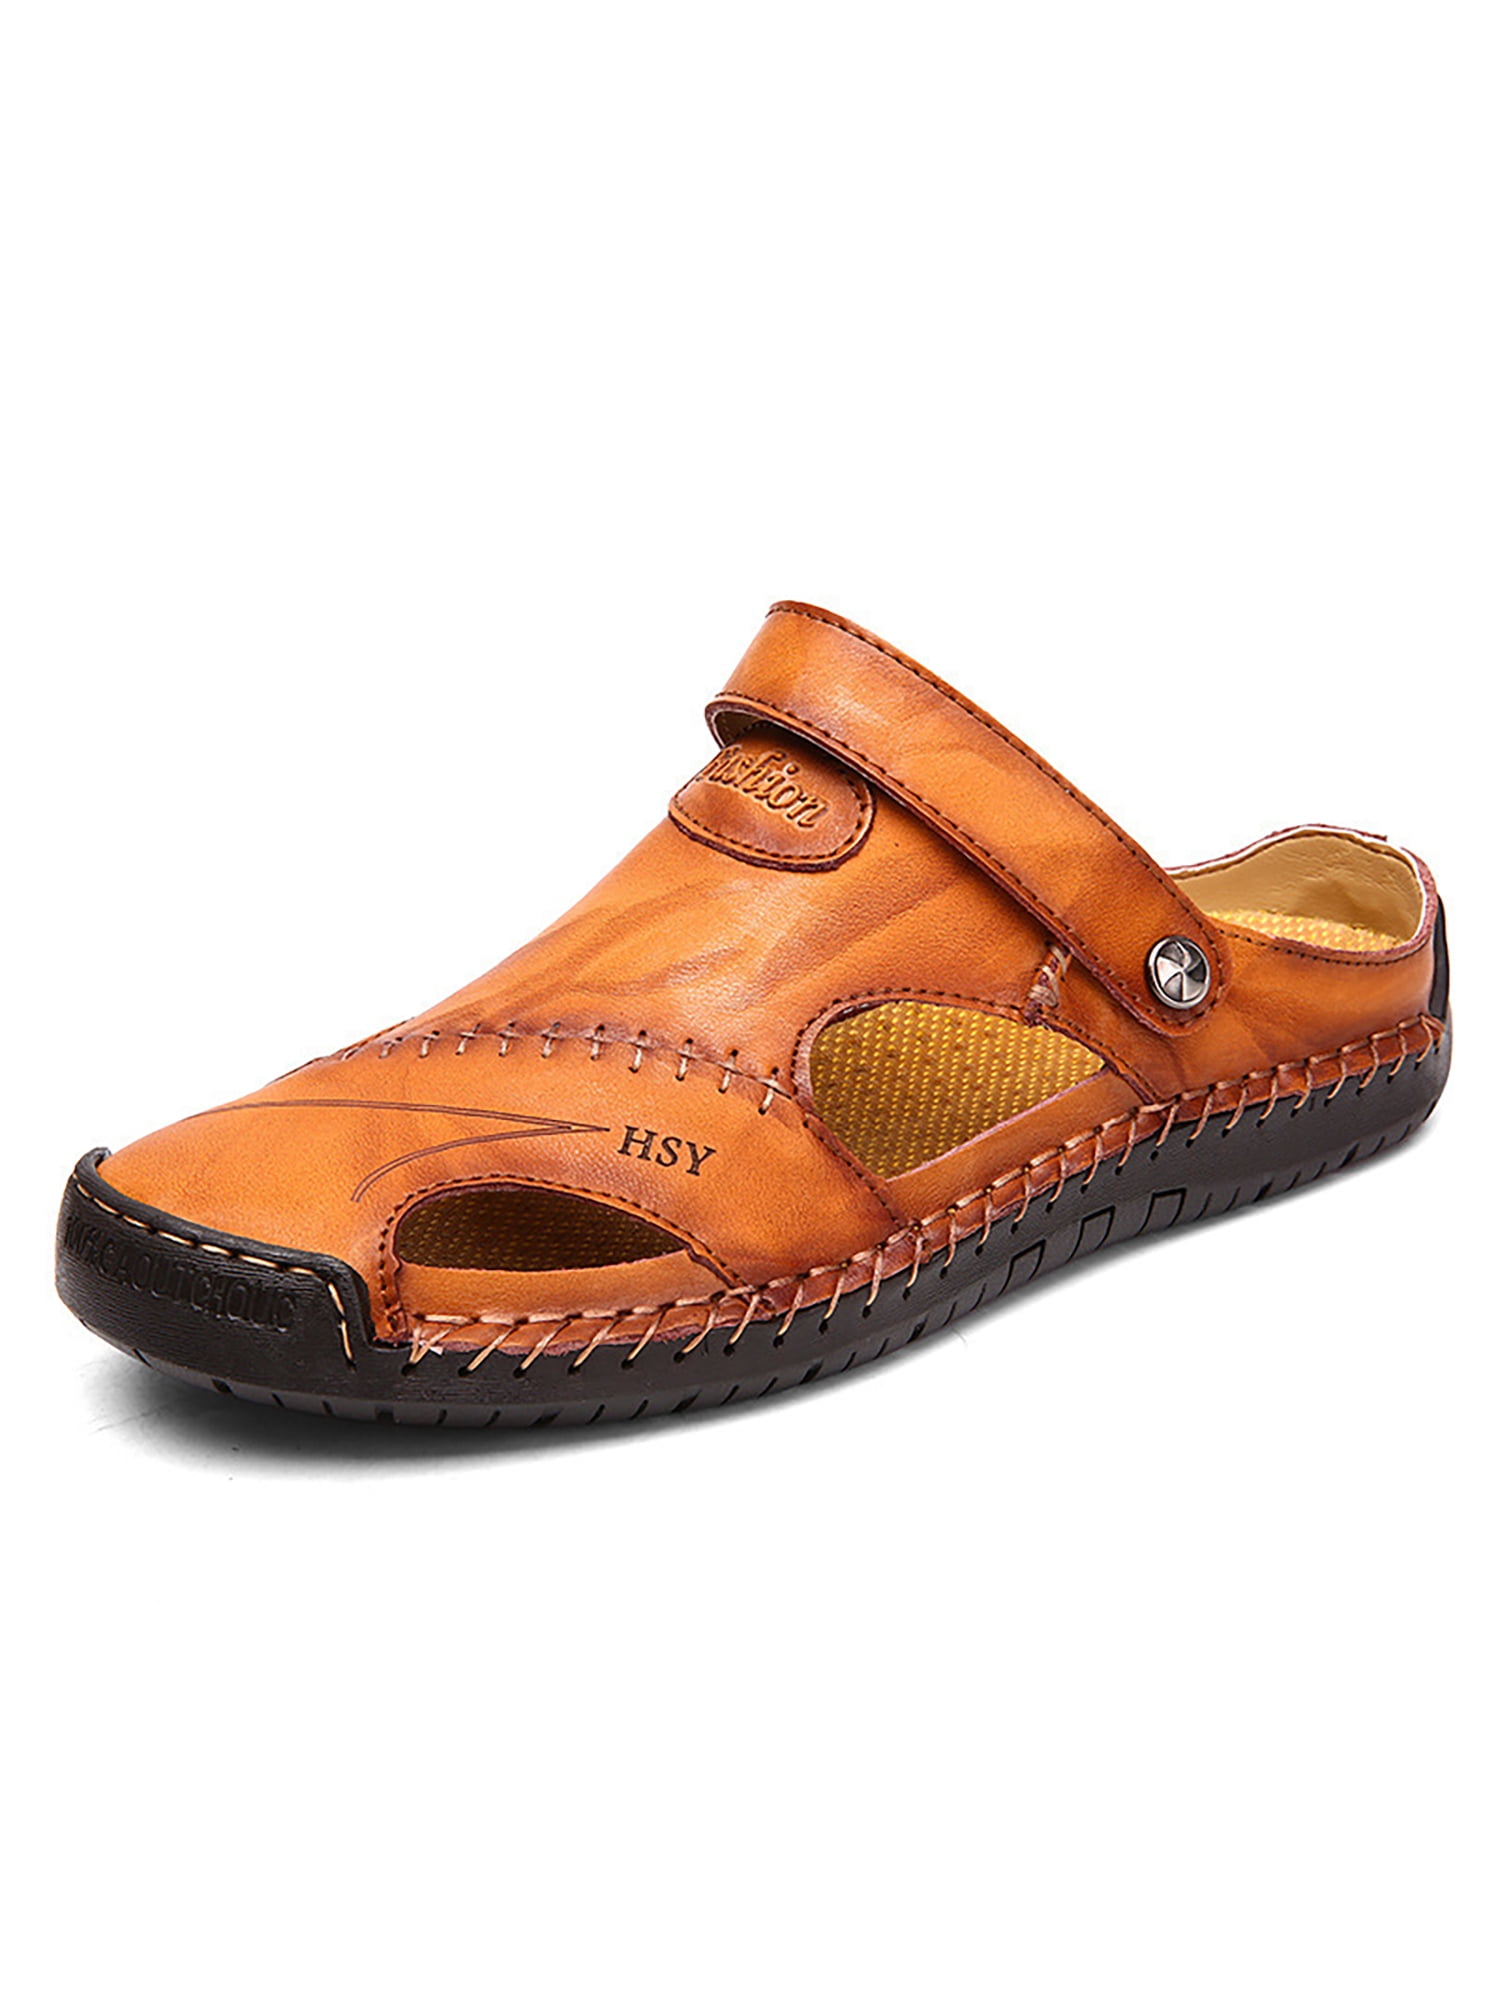 Sandals Beach Men Casual Summer Walking hollow out 100% Genuine leather Slippers